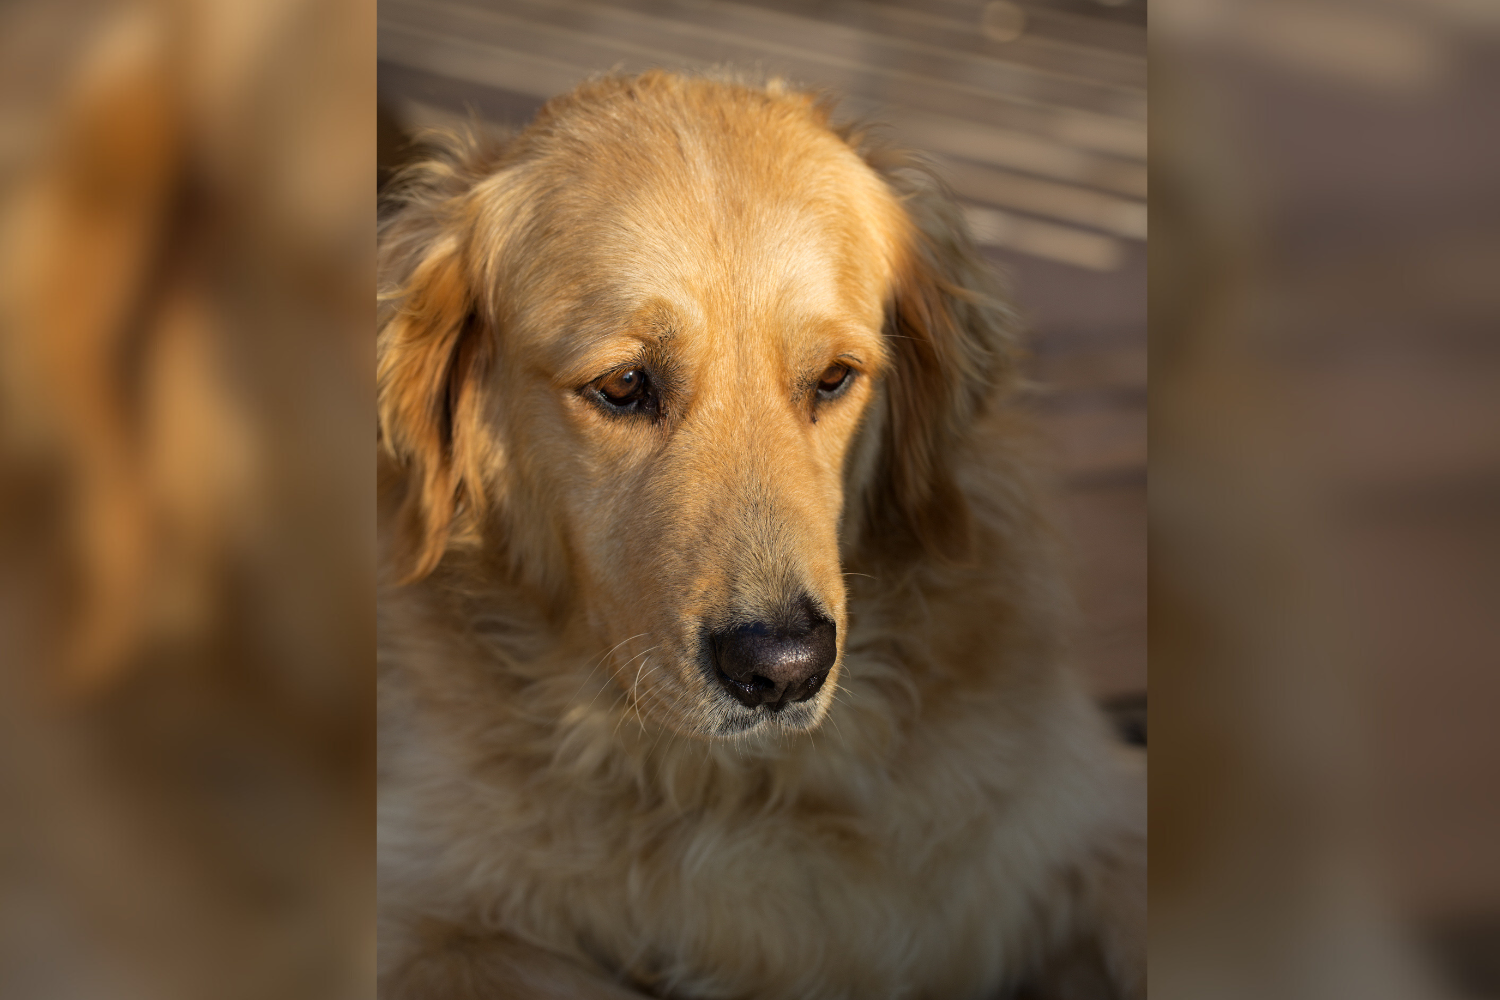 Owner discovers hilarious real reason for golden retriever’s sudden limp